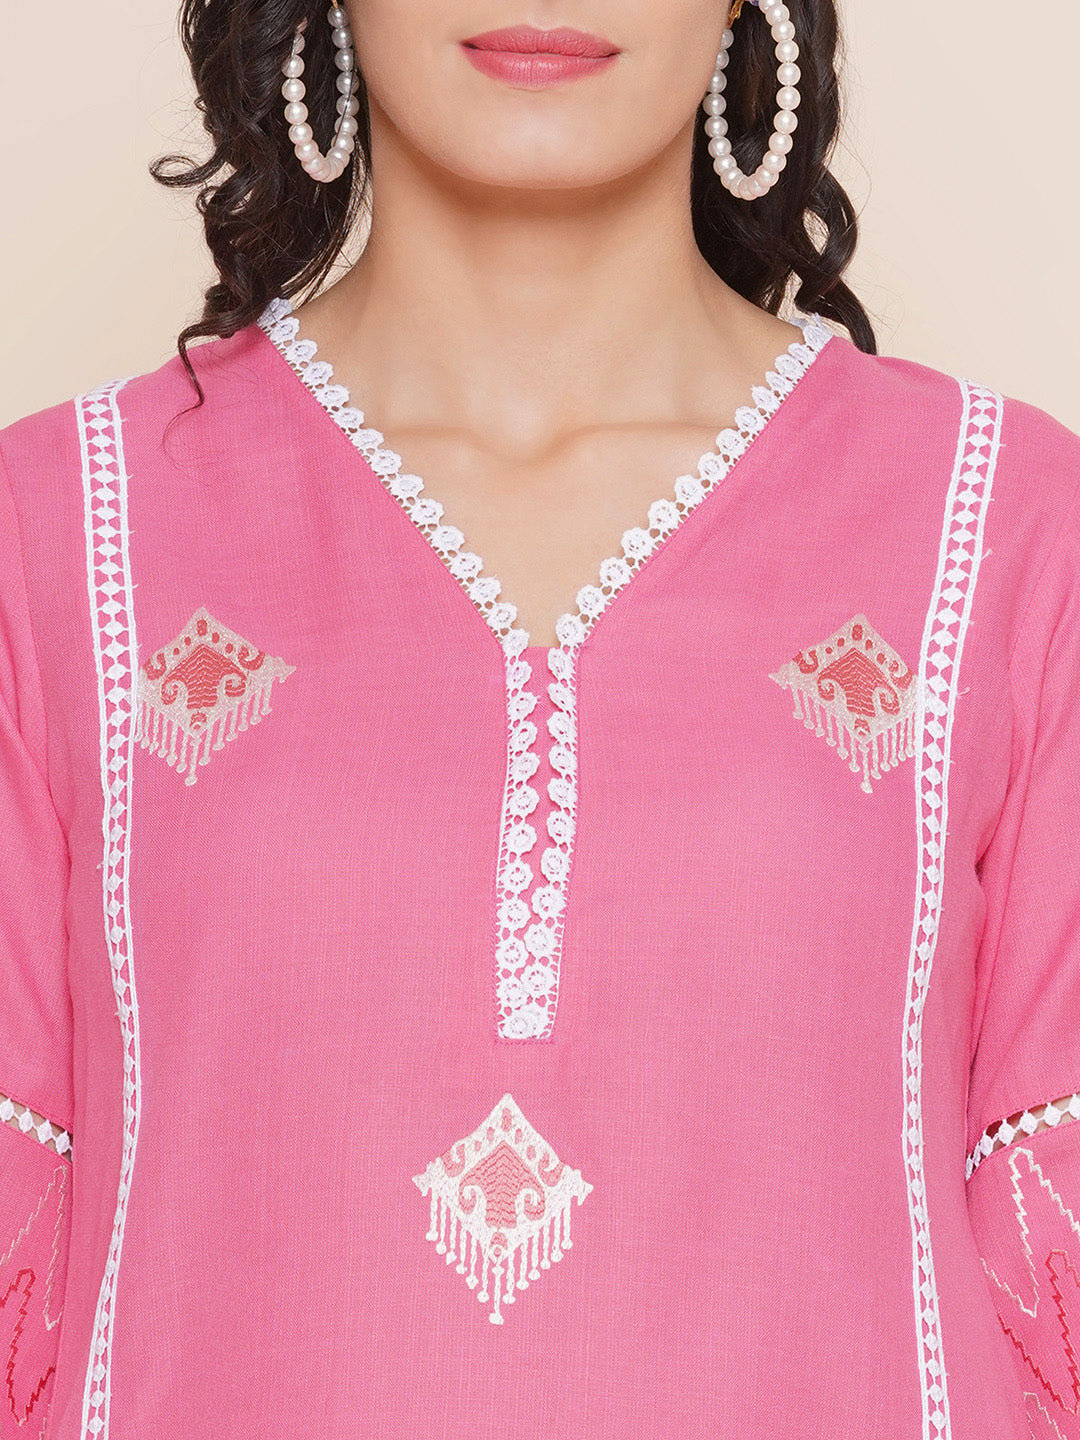 Pink Embroidered Kurta with lace detailing & Pink Solid Palazzos